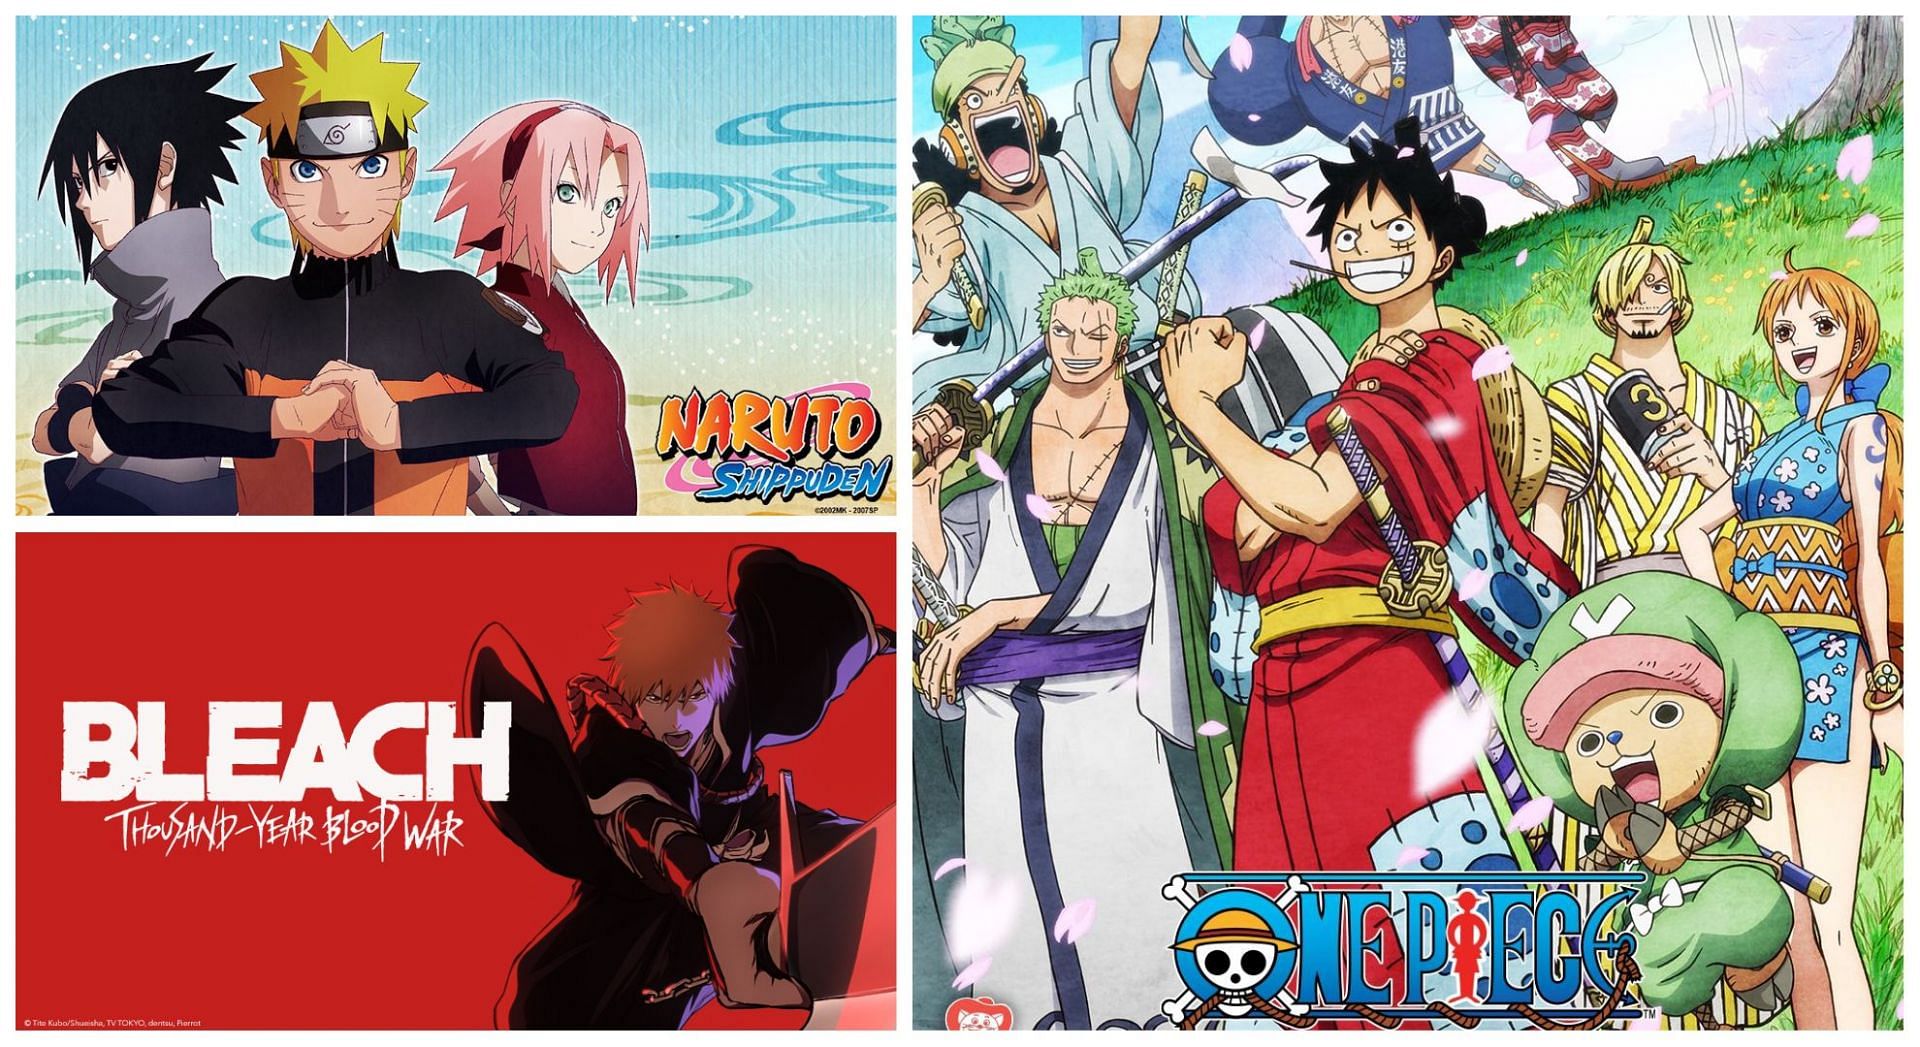 The big 3 anime: Decoding the popularity of Naruto, Bleach, and One Piece